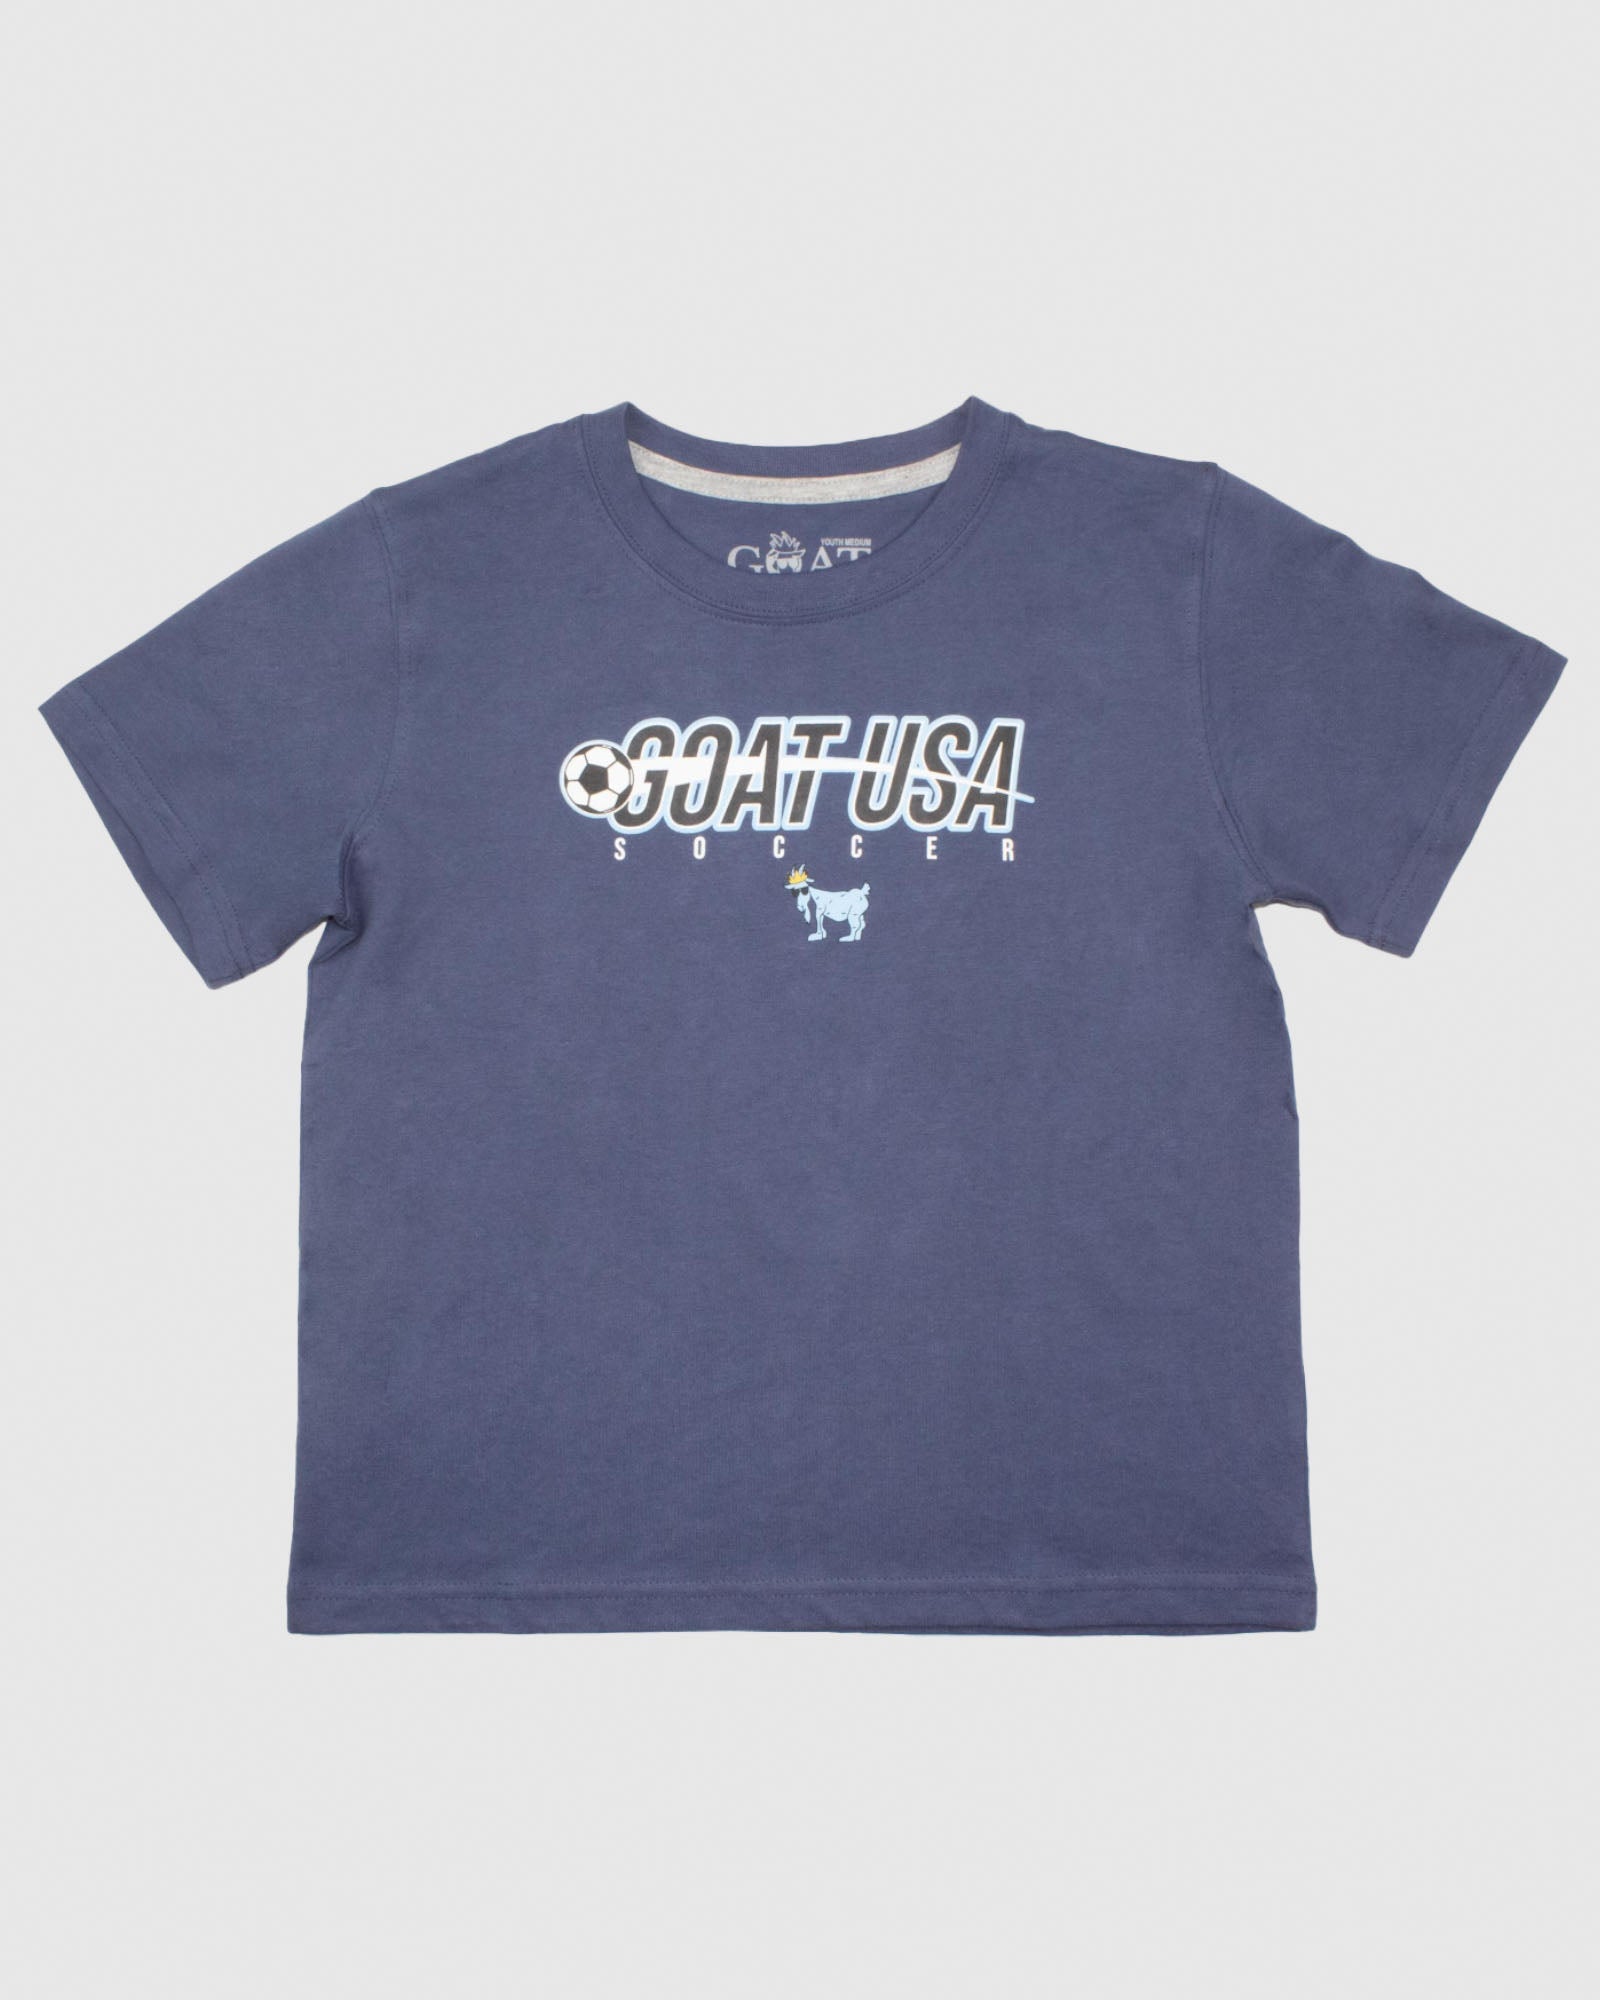 Goat USA Youth Showtime Soccer T-Shirt Apparel Goat USA Navy Youth Small 